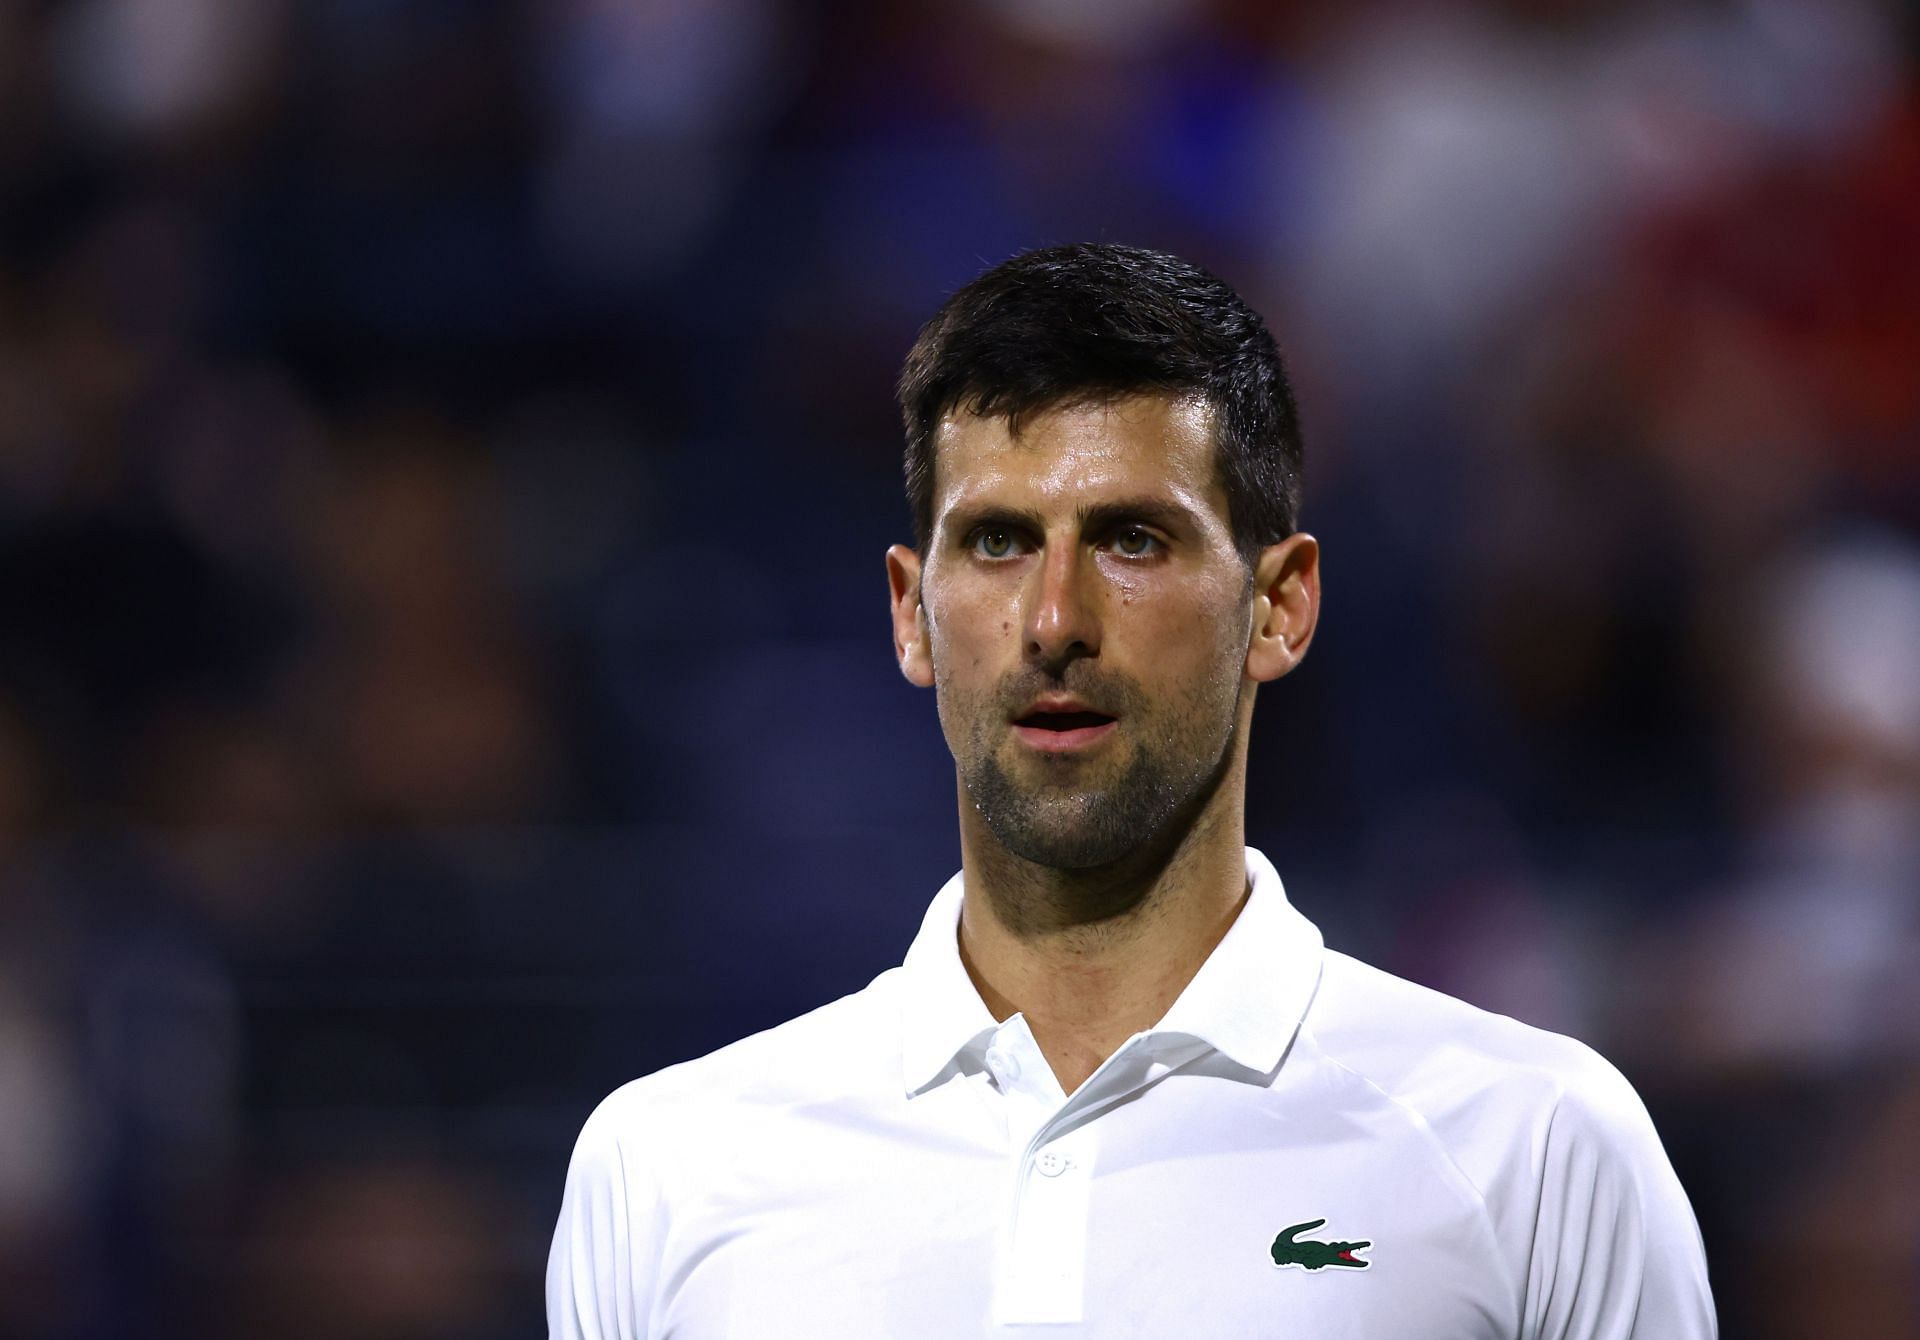 Novak Djokovic has said that he will try to use the events of this year as a fuel to play his best tennis possible